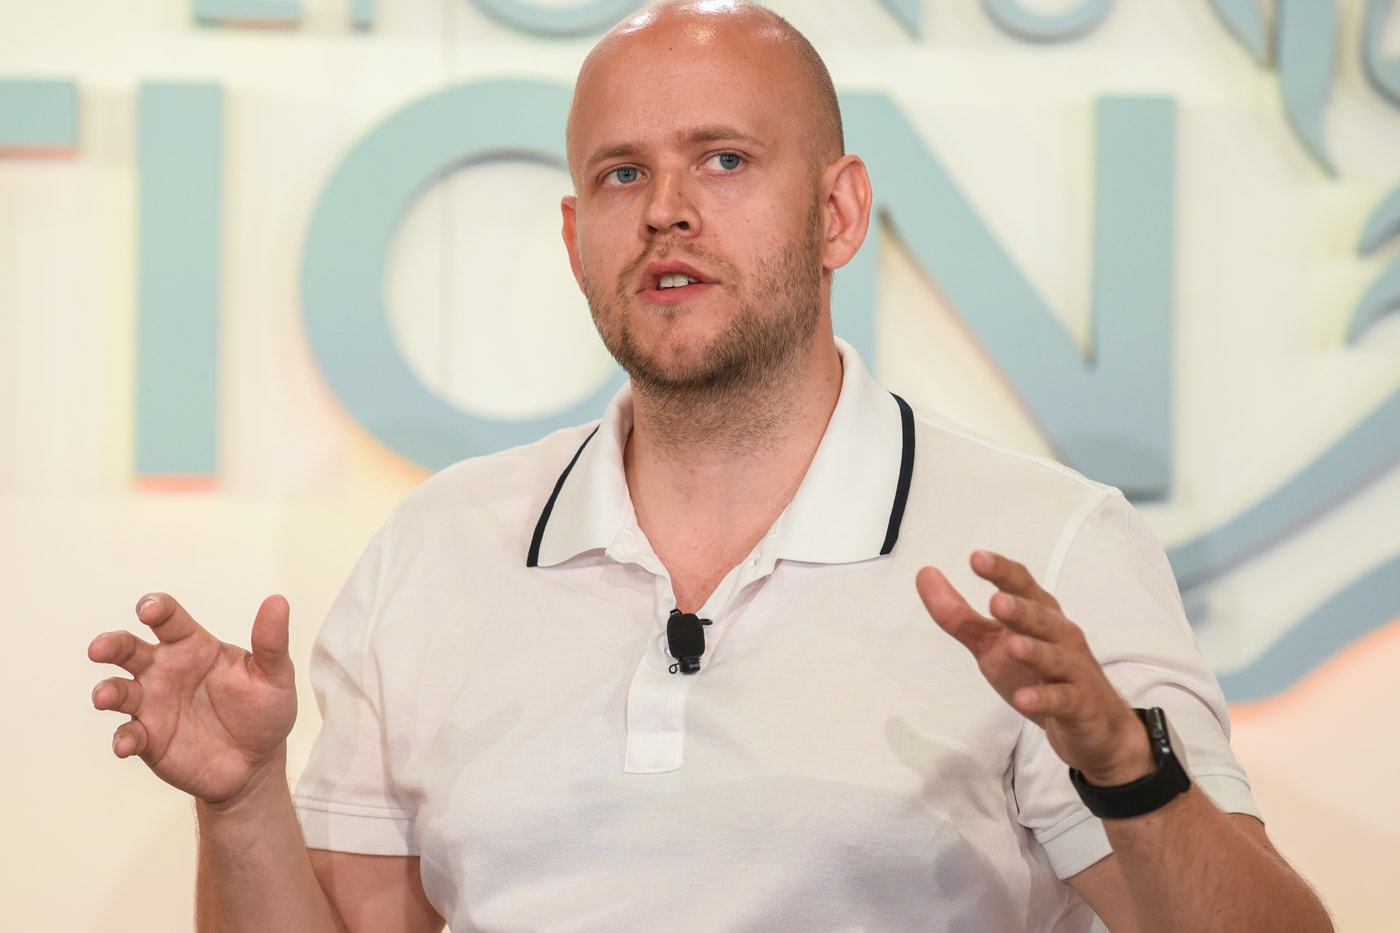 spotify-ceo-30-million-paid-subscribers-number